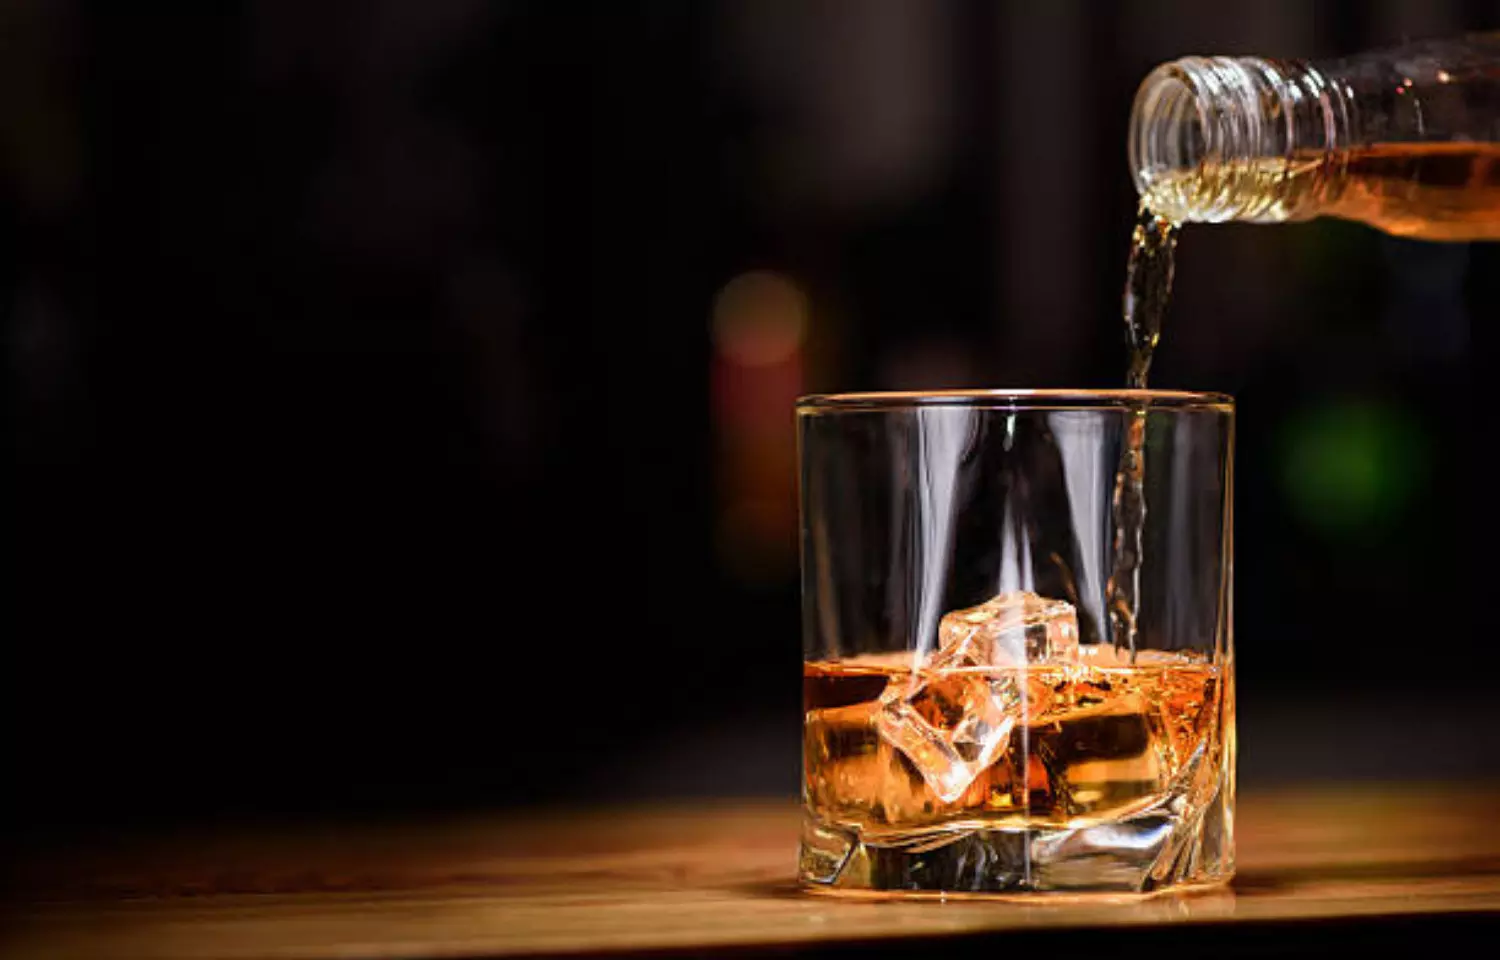 Only one to two drinks daily may lead to brain shrinkage and neuronal loss